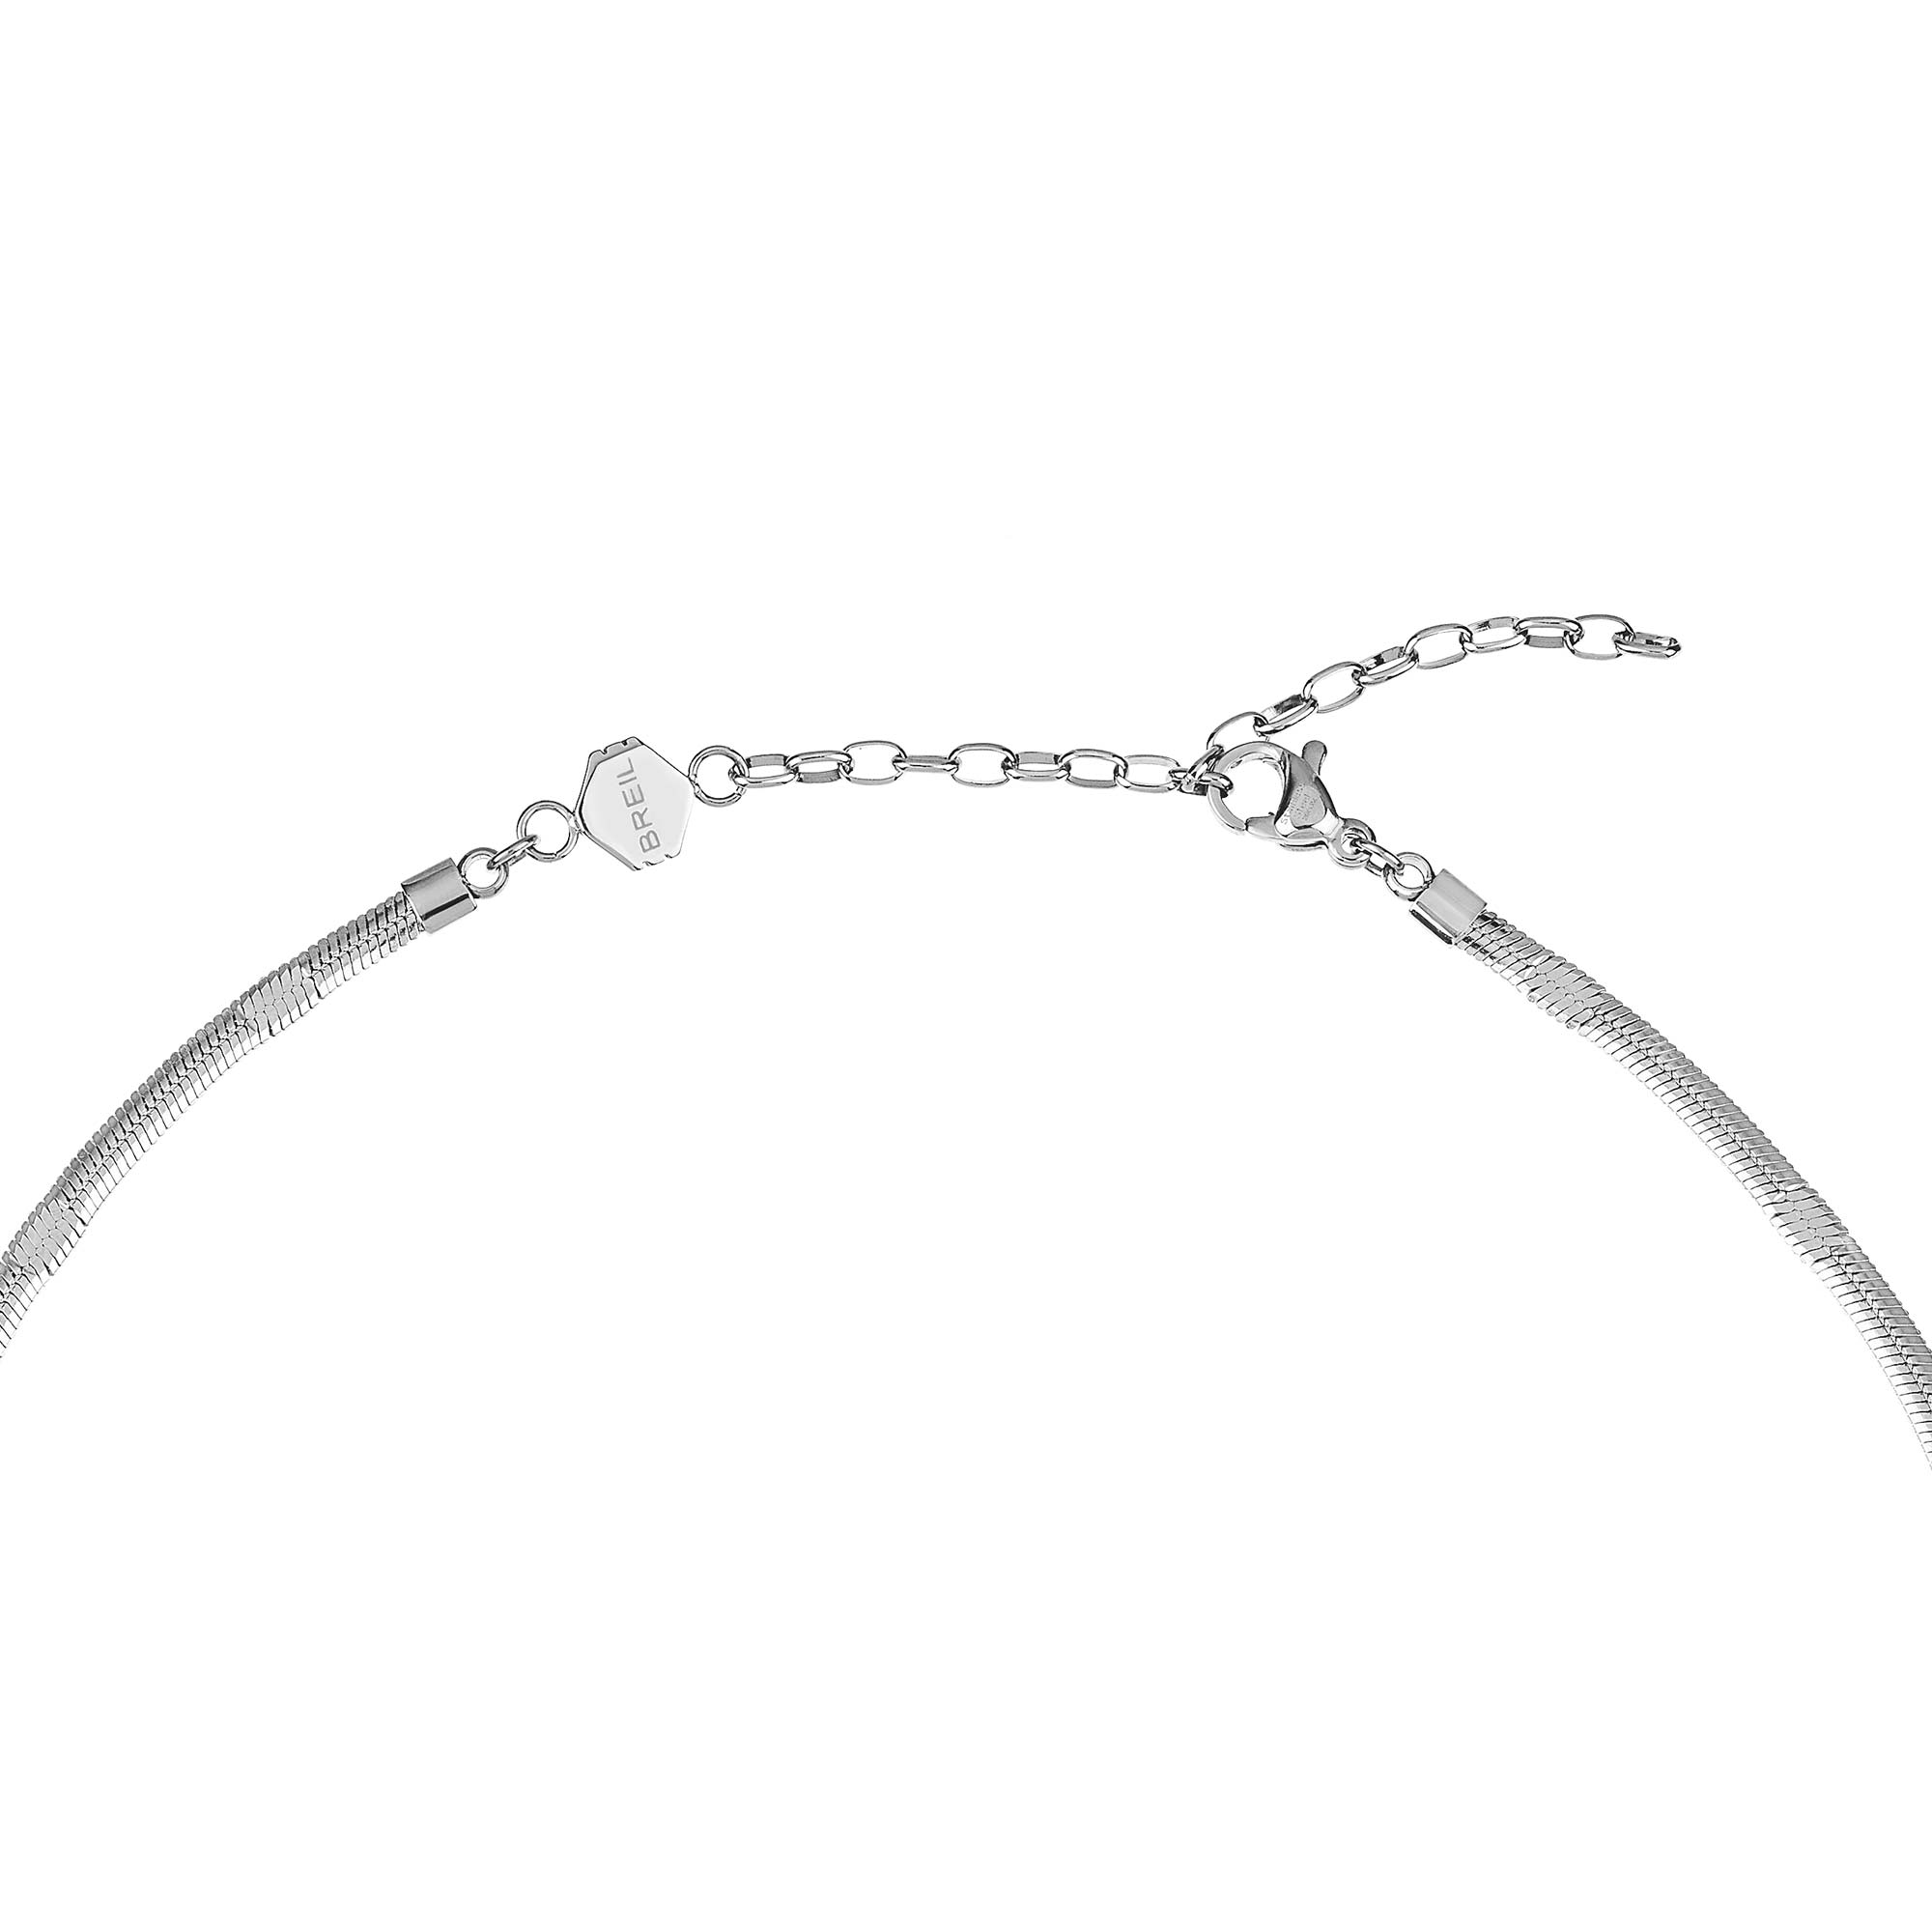 SINUOUS - STAINLESS STEEL NECKLACE - 2 - TJ3092 | Breil